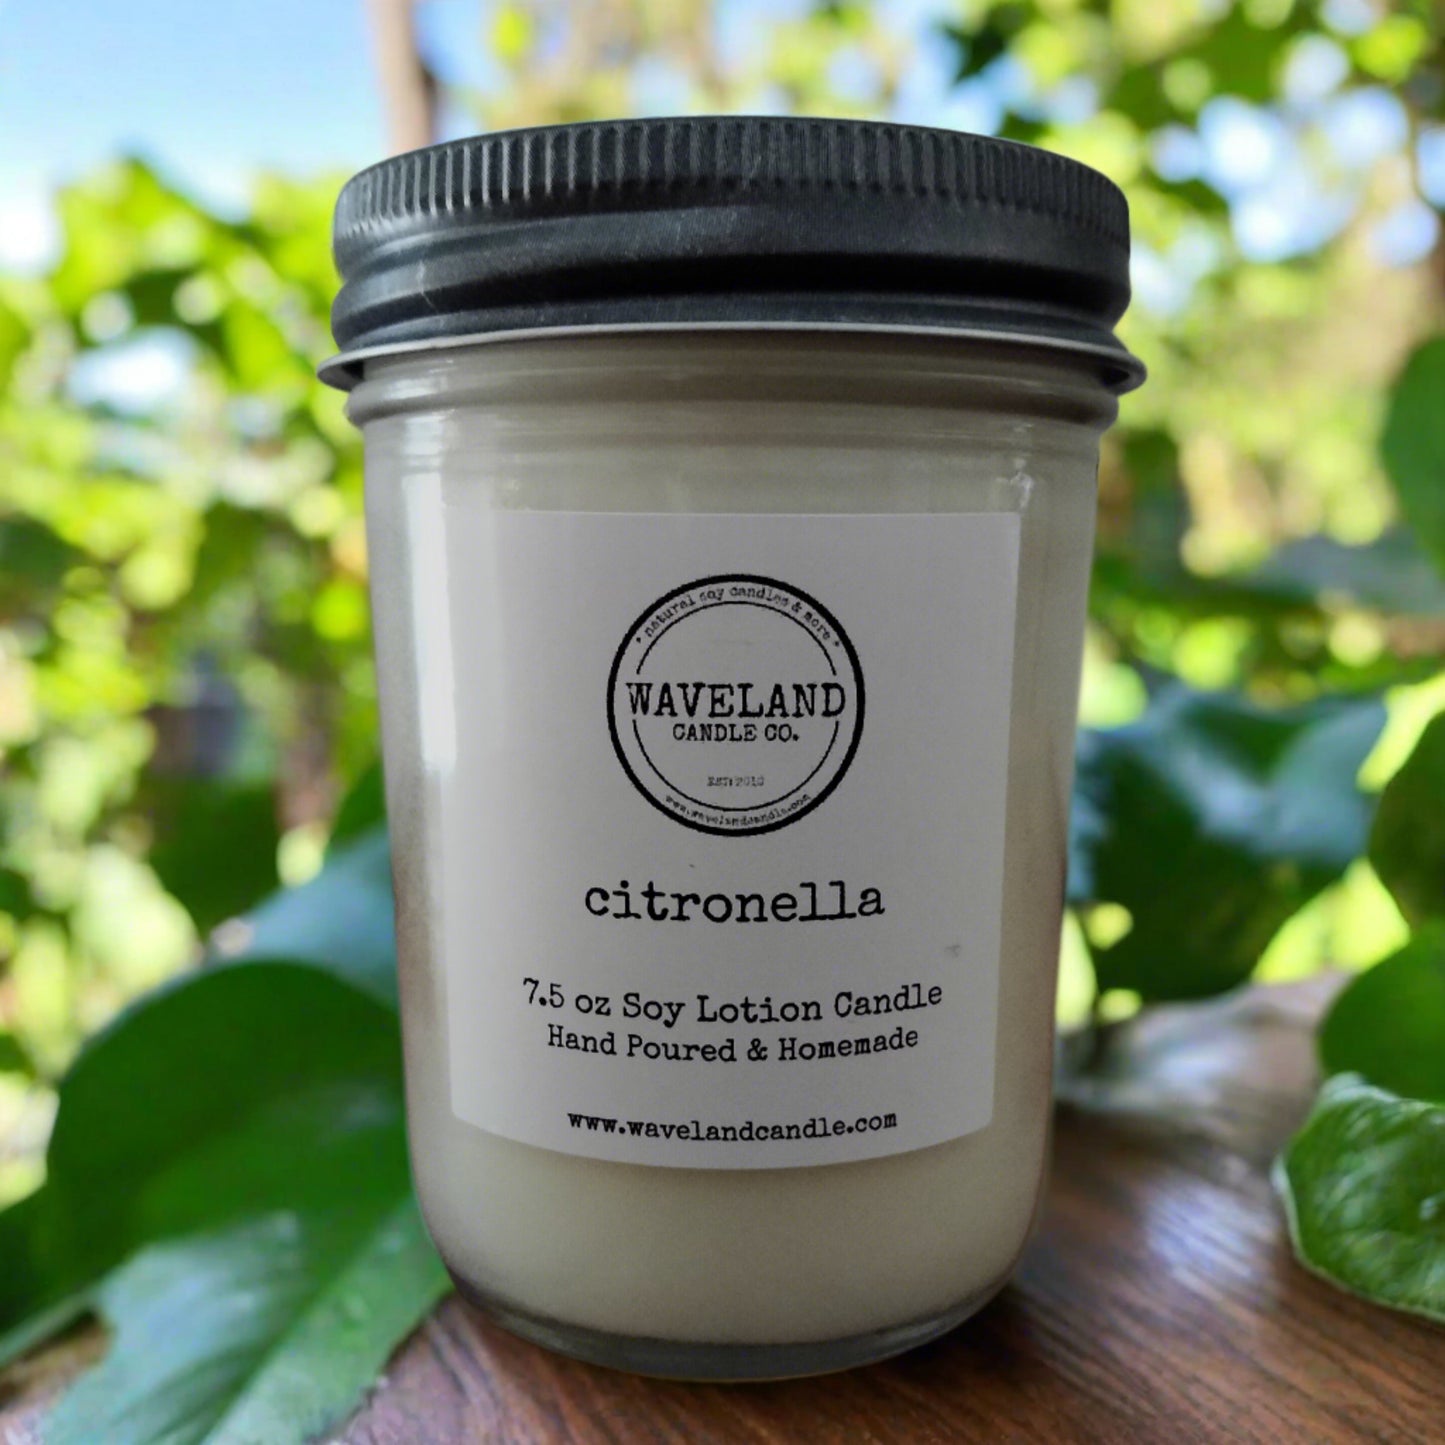 7.5 oz Jelly Jar Citronella Soy Candle